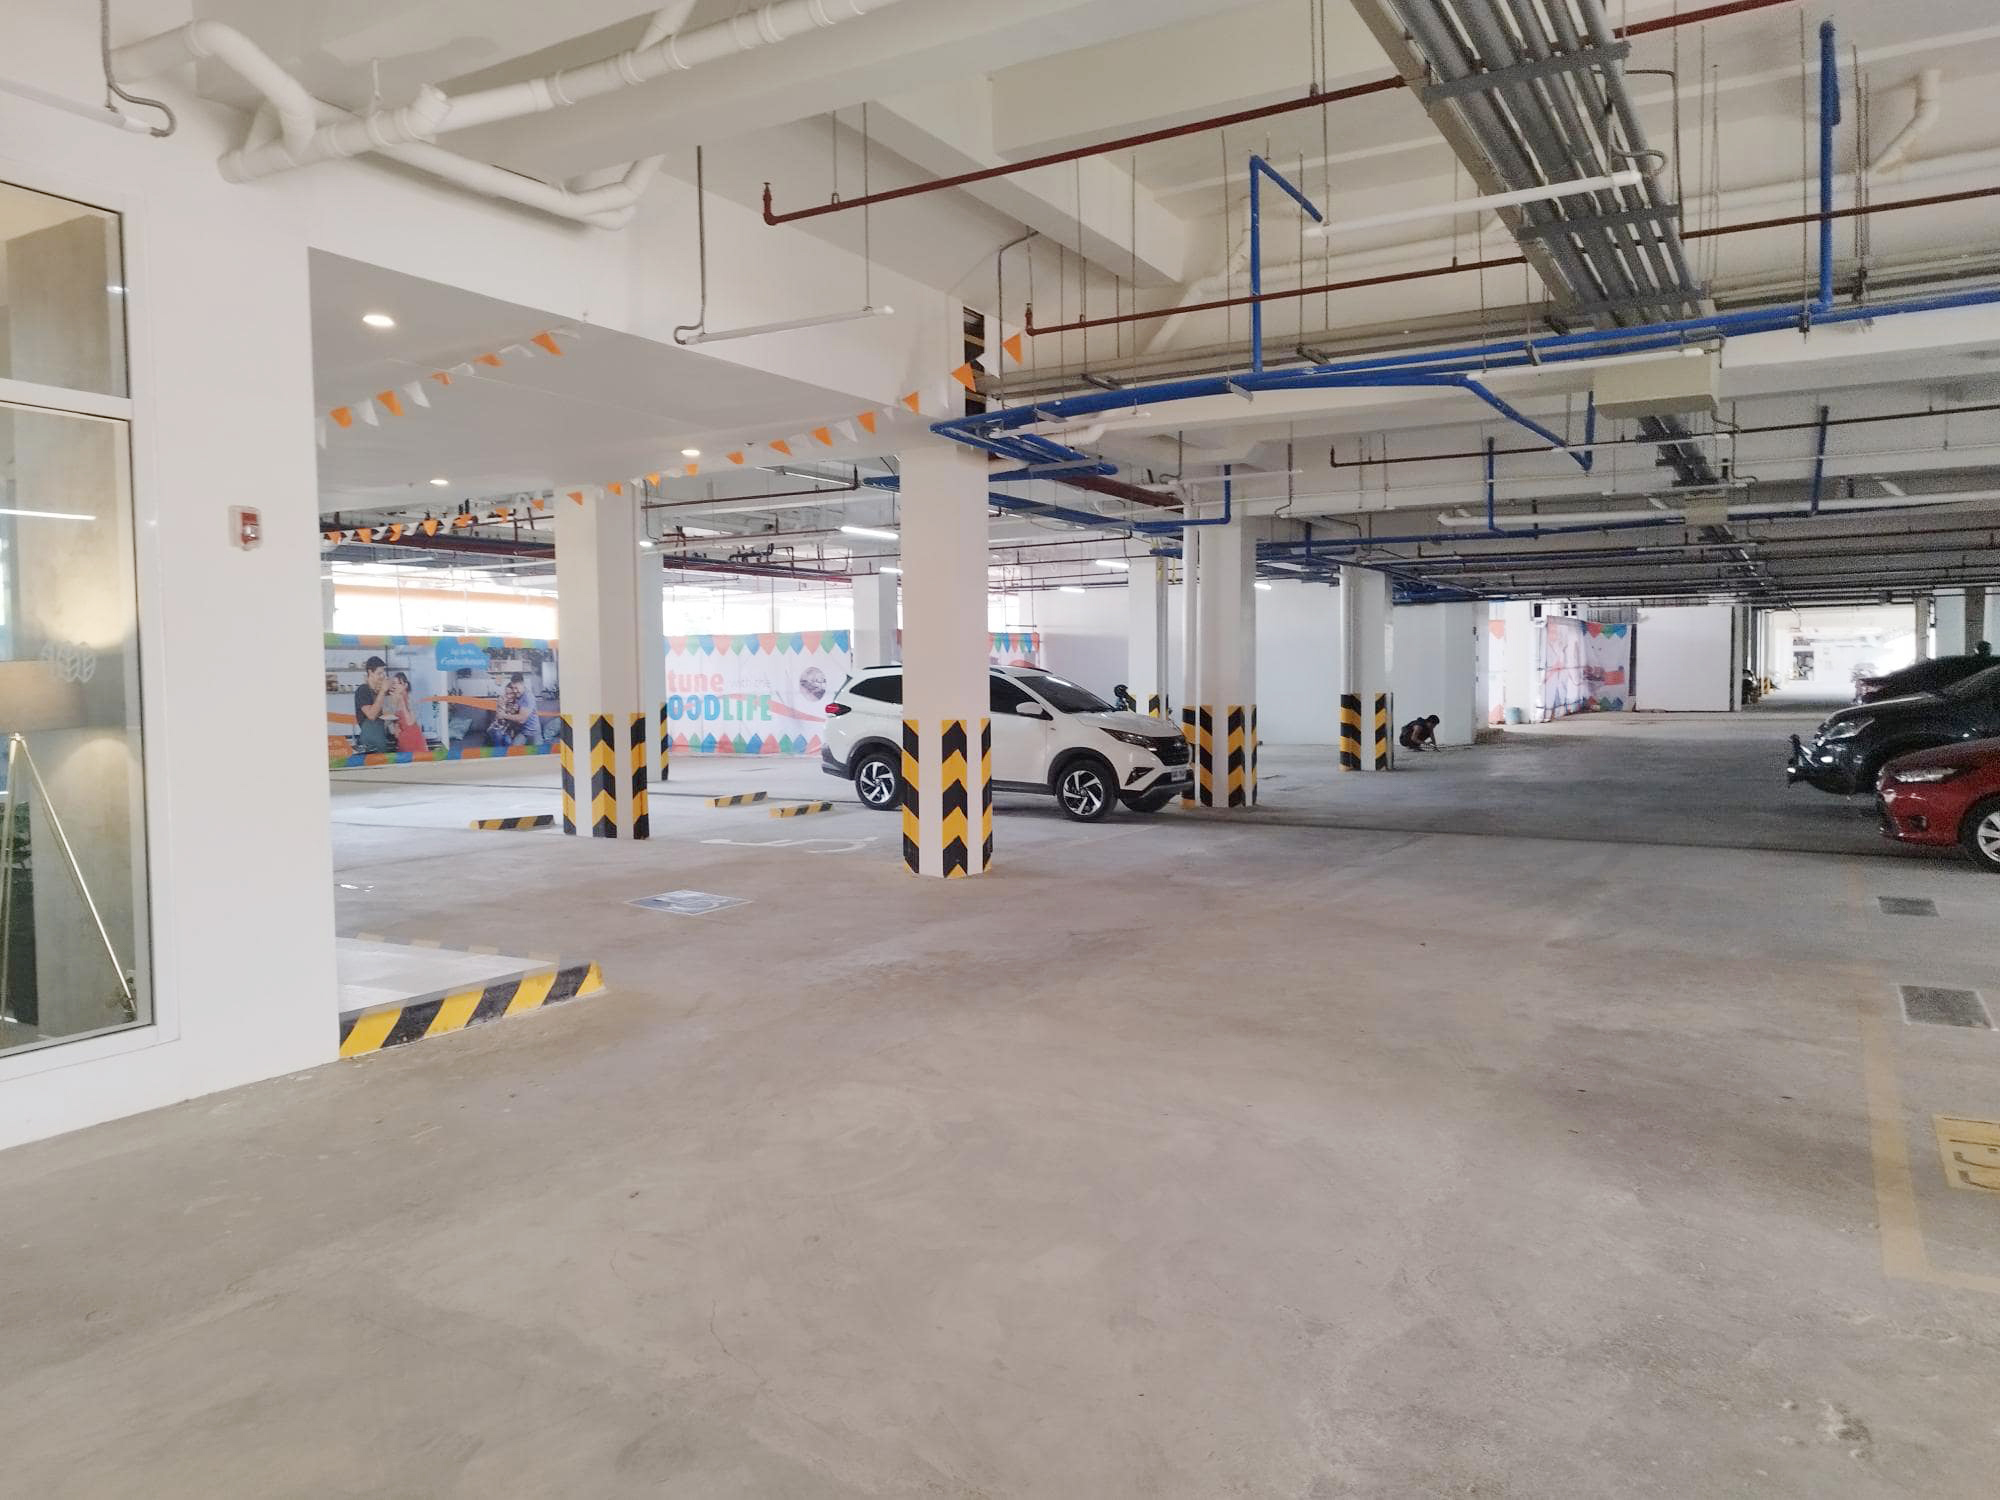 August - Completion of Parking Area